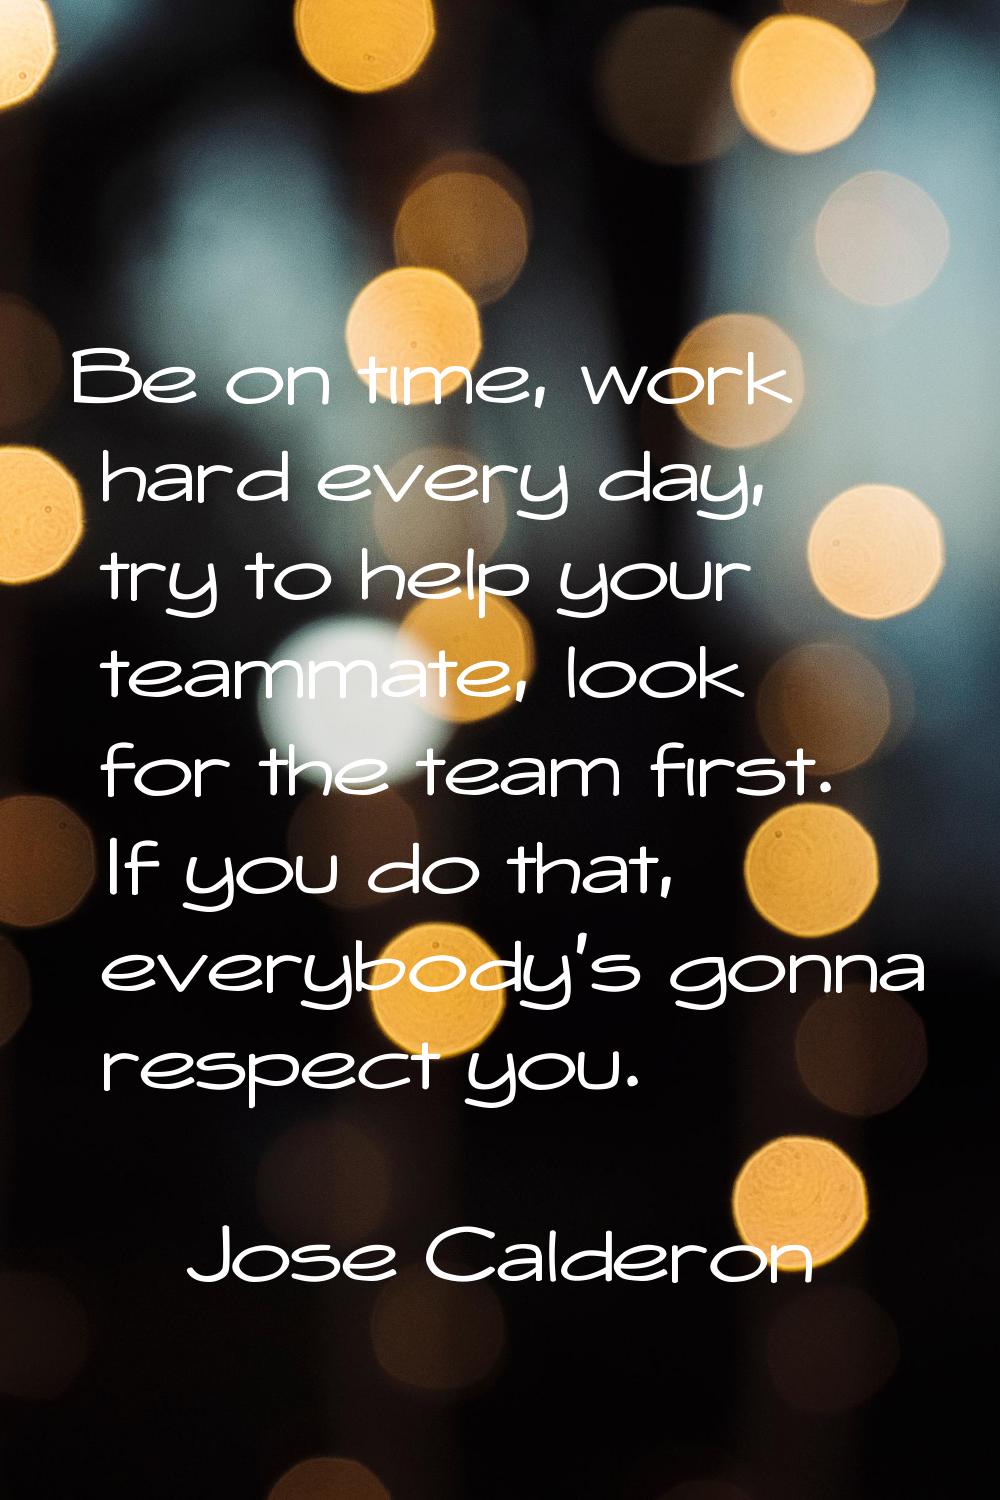 Be on time, work hard every day, try to help your teammate, look for the team first. If you do that